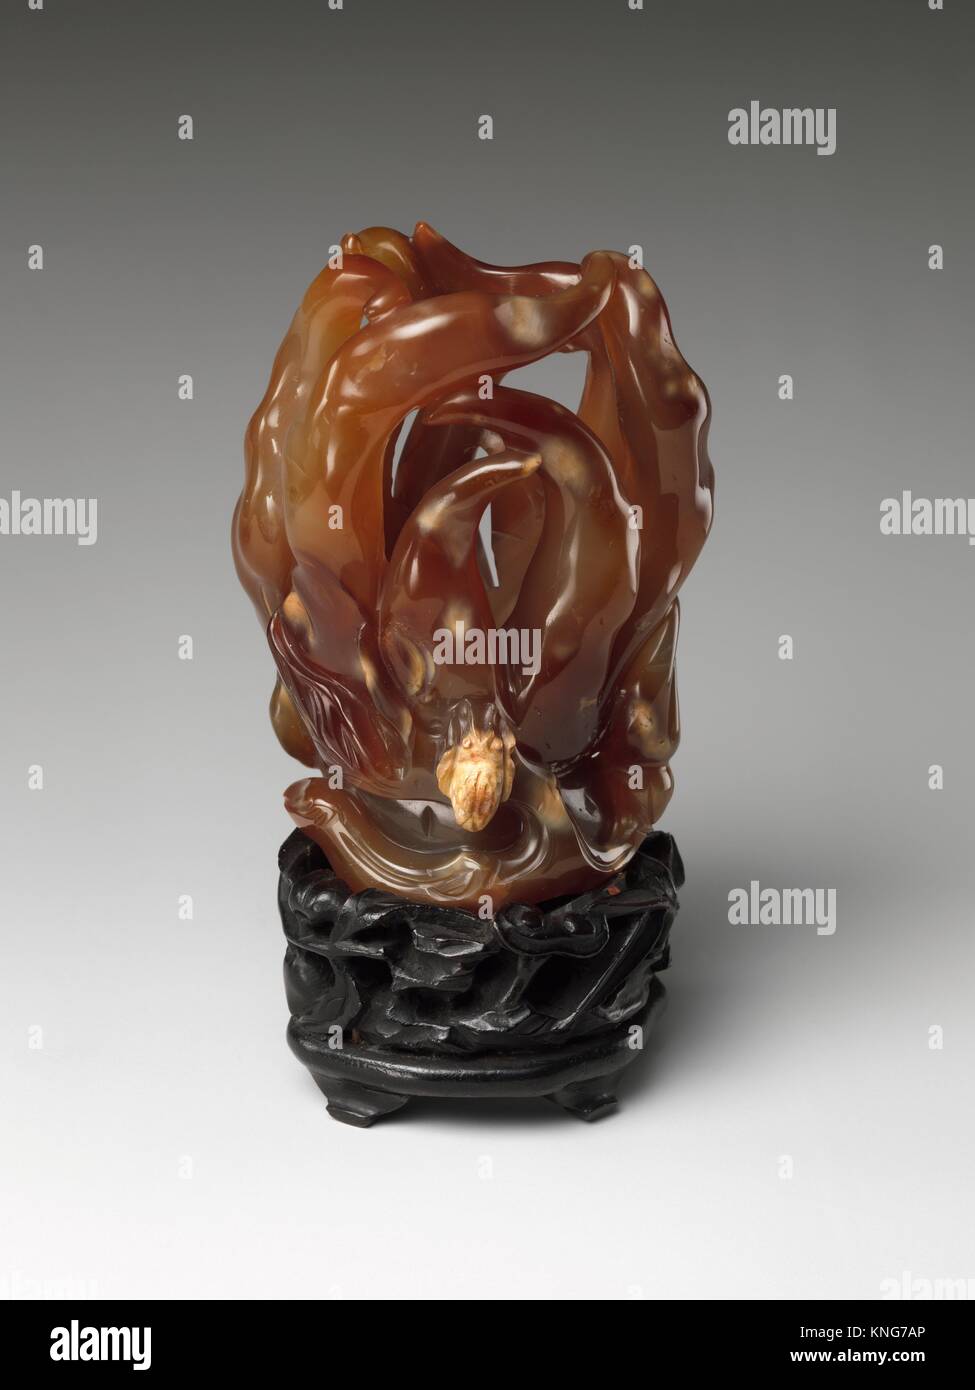 Period: Qing dynasty (1644-1911); Date: 18th century; Culture: China; Medium: Carnelian; Dimensions: H. 4 in. (10.2 cm); Classification: Hardstone Stock Photo